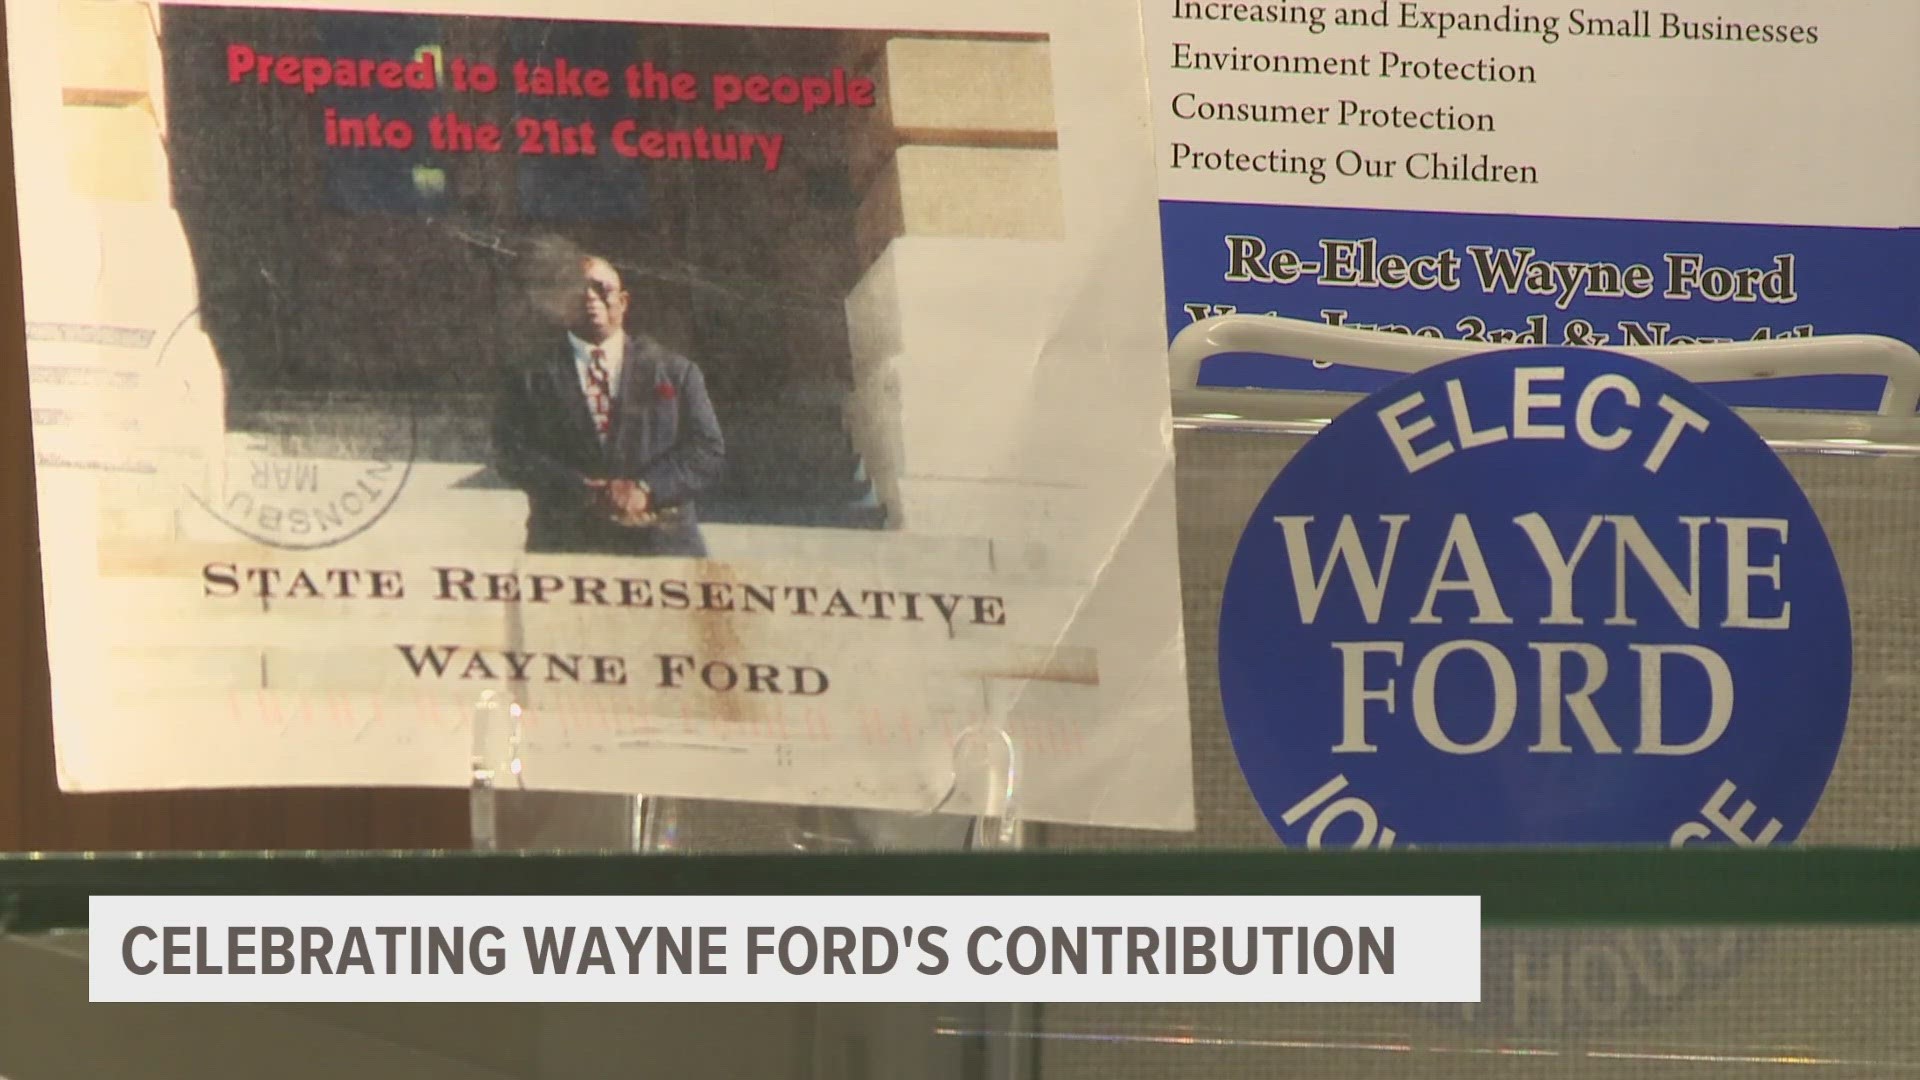 Drake University is honoring Wayne Ford's lasting legacy with a display at Cowles Library this week.